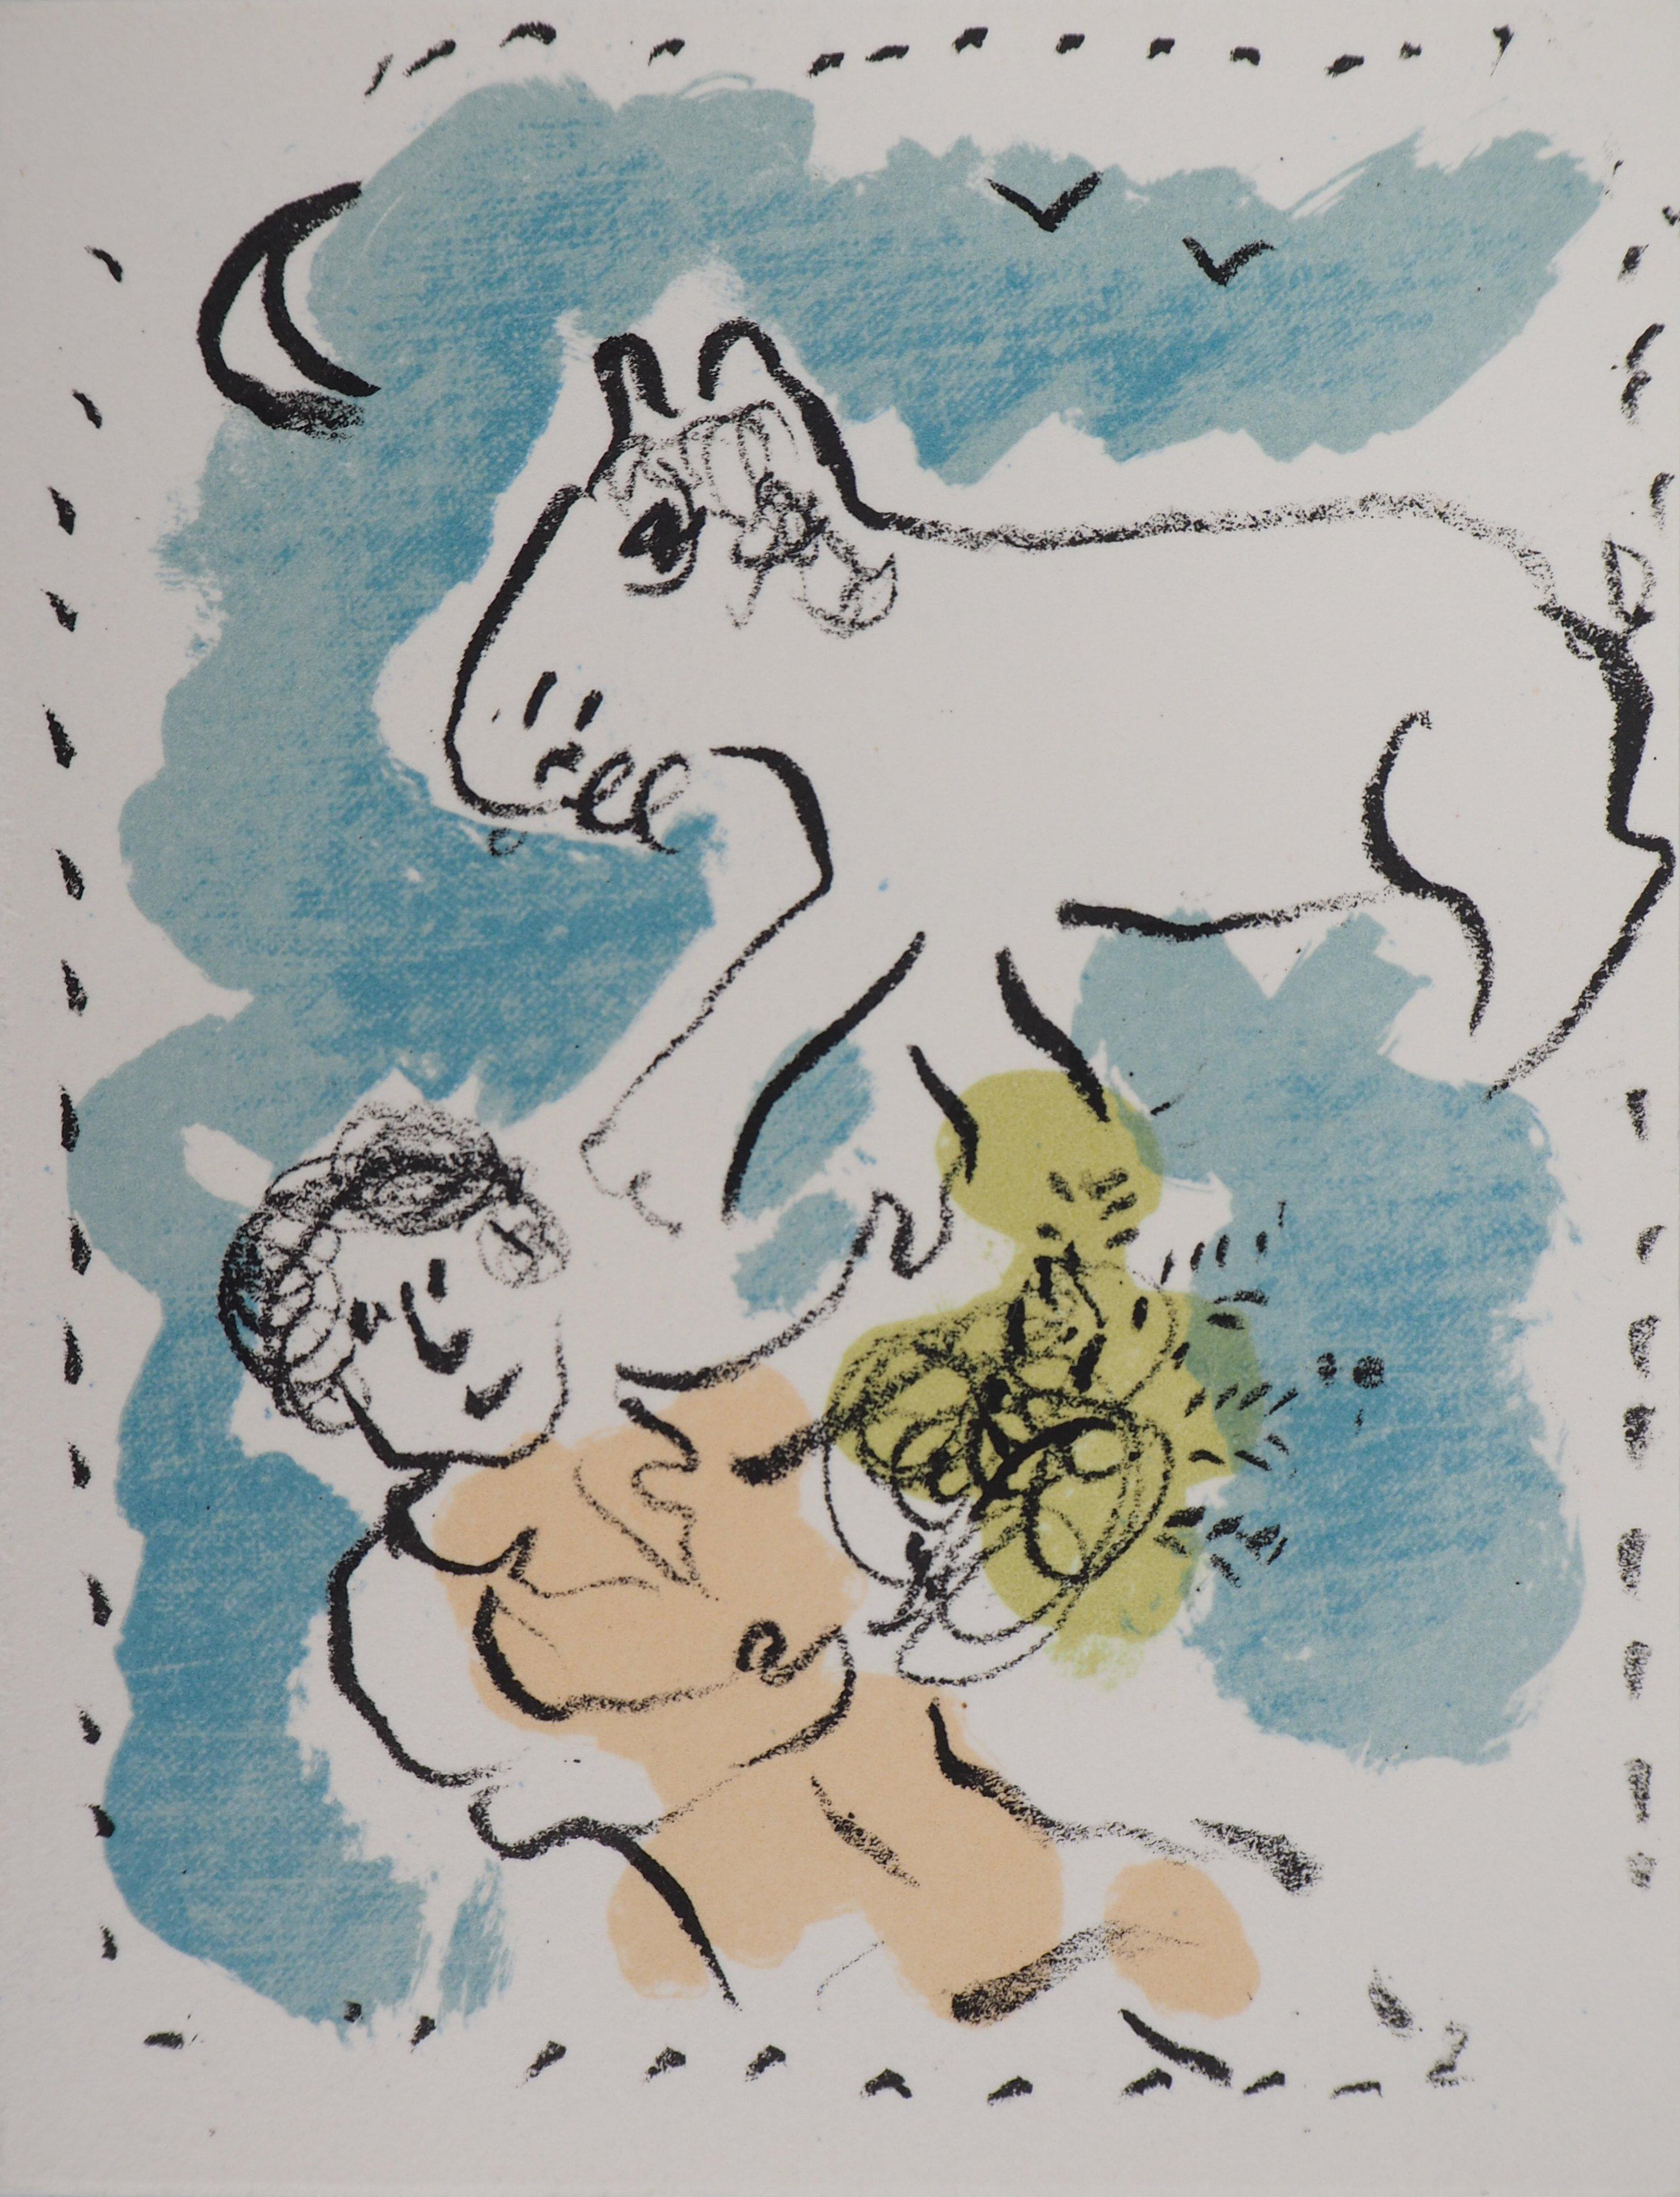 Marc Chagall Figurative Print - Woman and Donkey under Moon (Greeting Card) - Original lithograph - Moulot #984